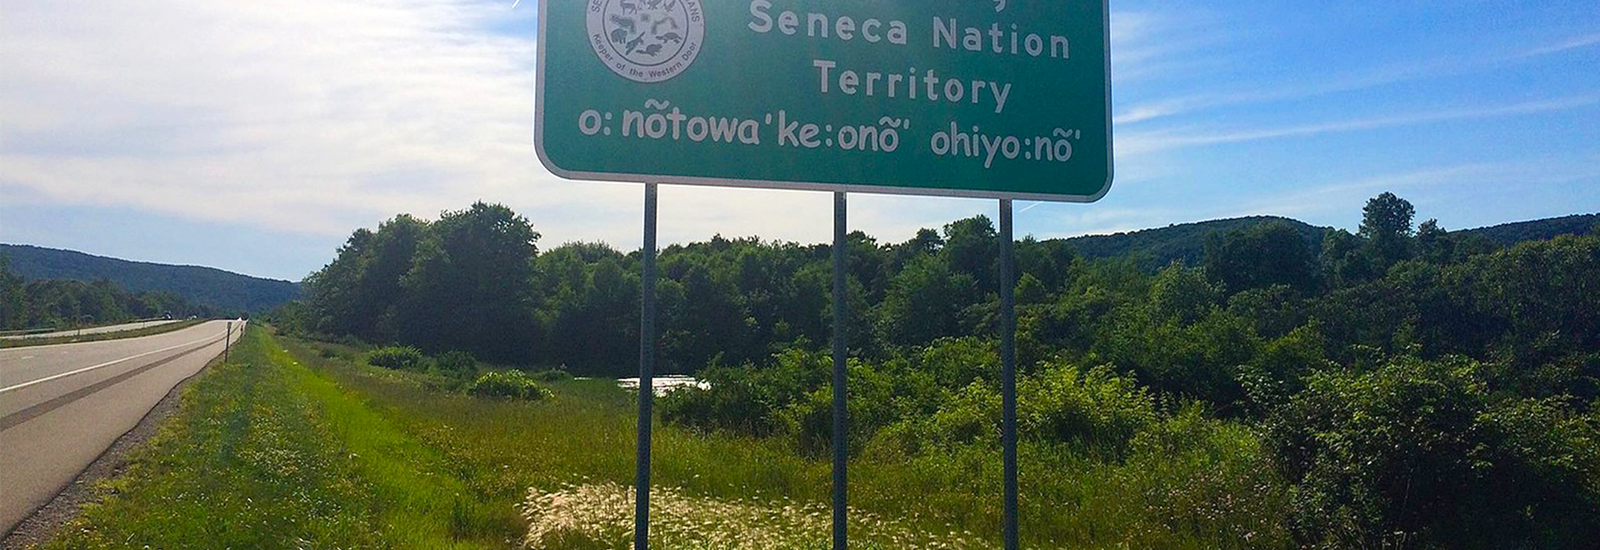 Photograph of road sign with text that reads "Entering Seneca Nation Territory"